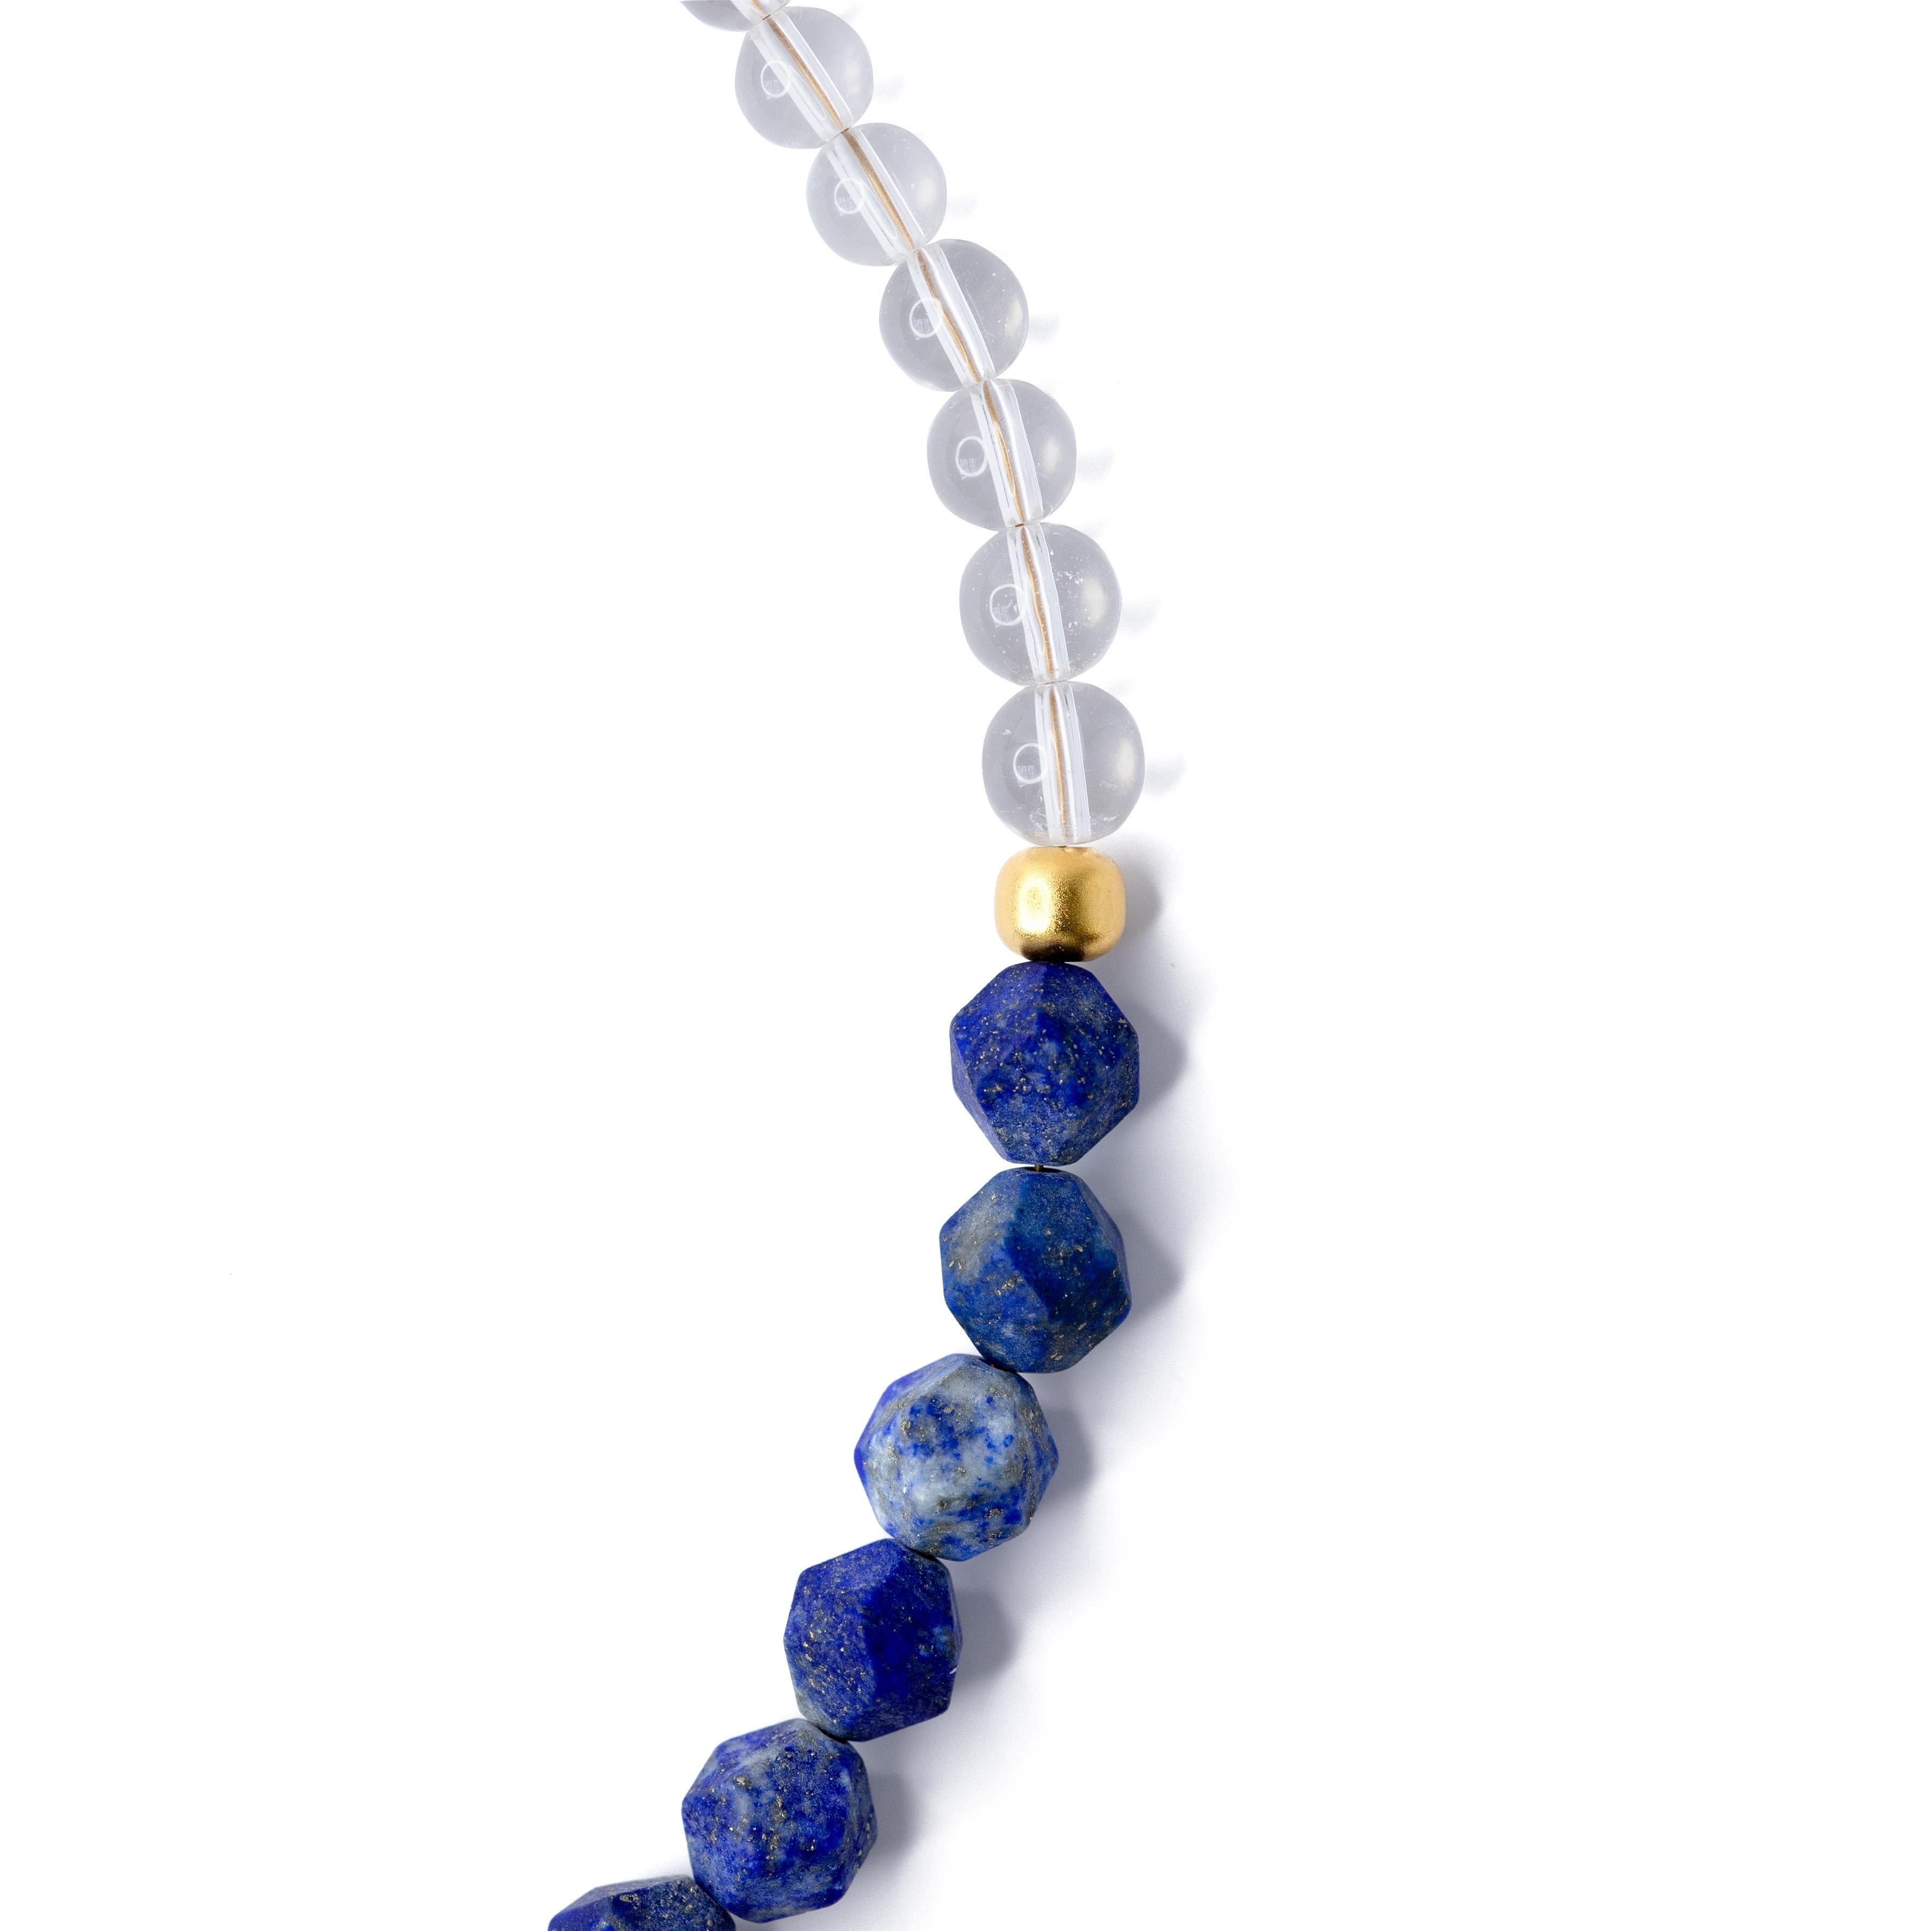 Bead Lazulite Lapis Lazuli Necklace - by Bombyx House For Sale